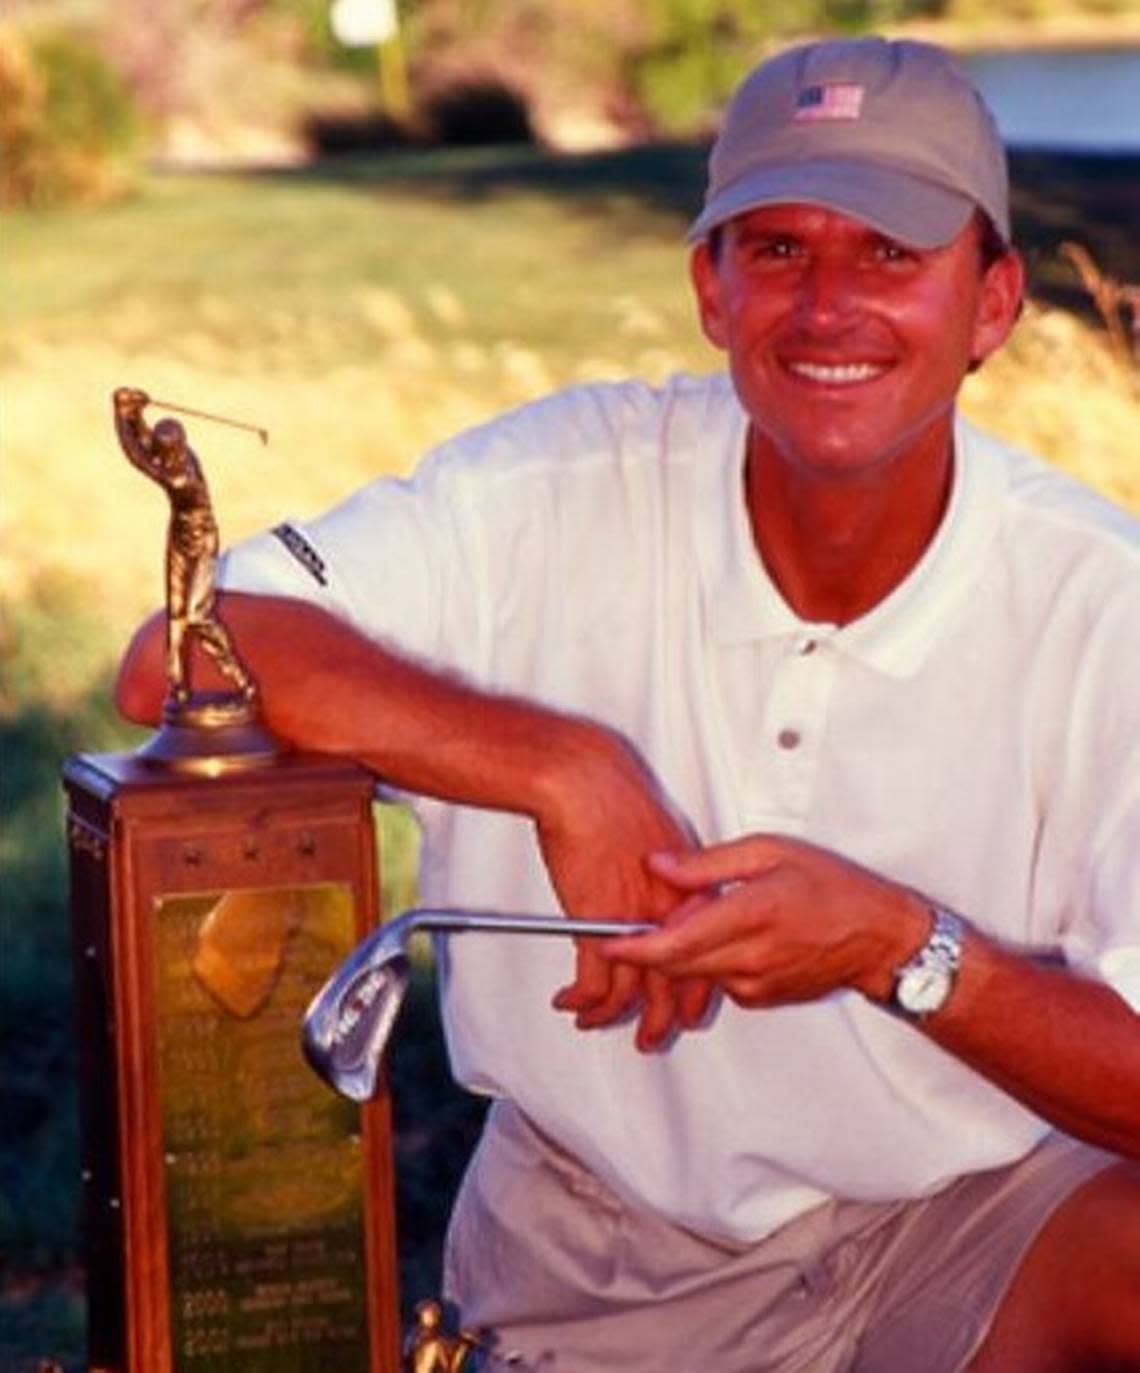 Salina native Bryan Norton has enjoyed a stellar golf career. He played professionally on the PGA Tour and for several years in Europe and was a highly decorated amateur. Here he is with his 2002 Kansas Amateur trophy.